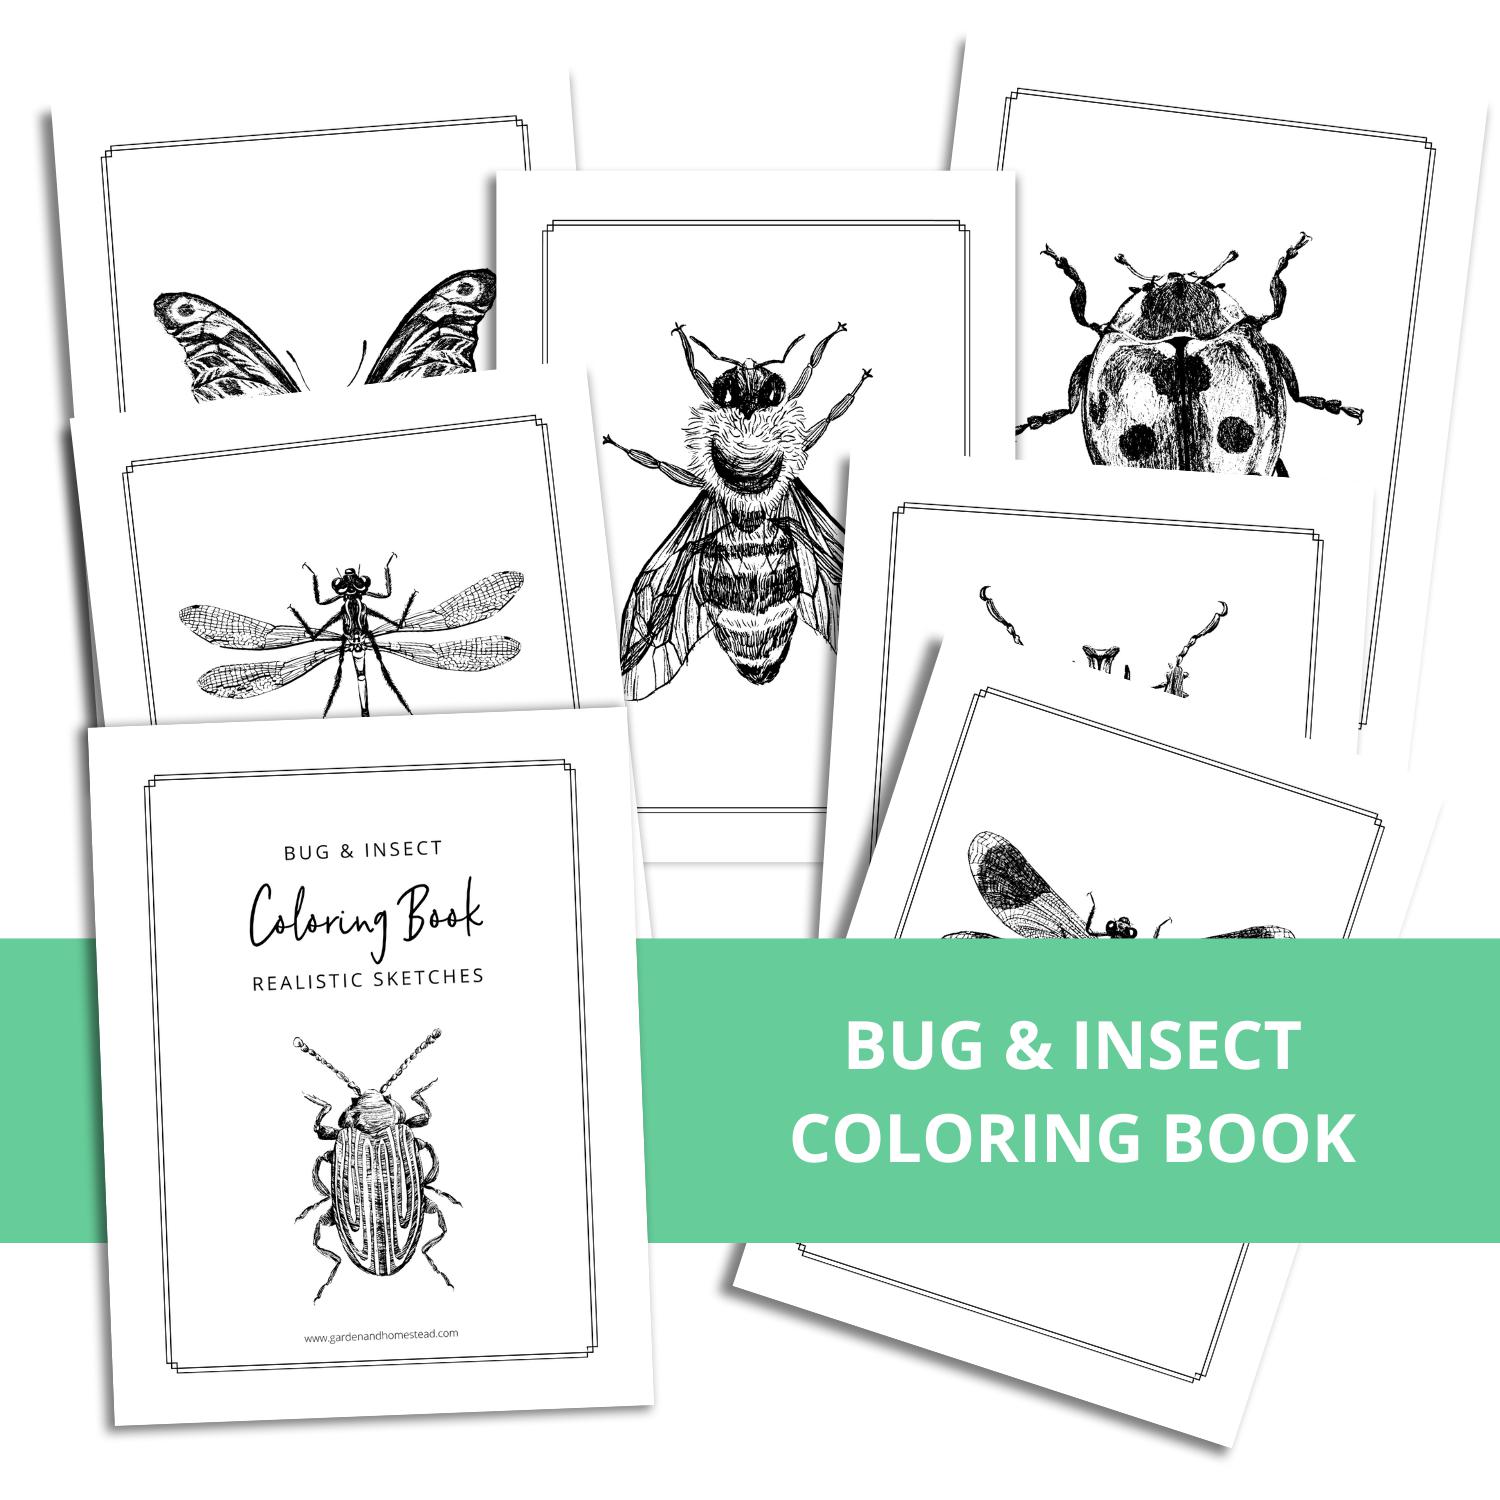 Bug and Insect coloring book